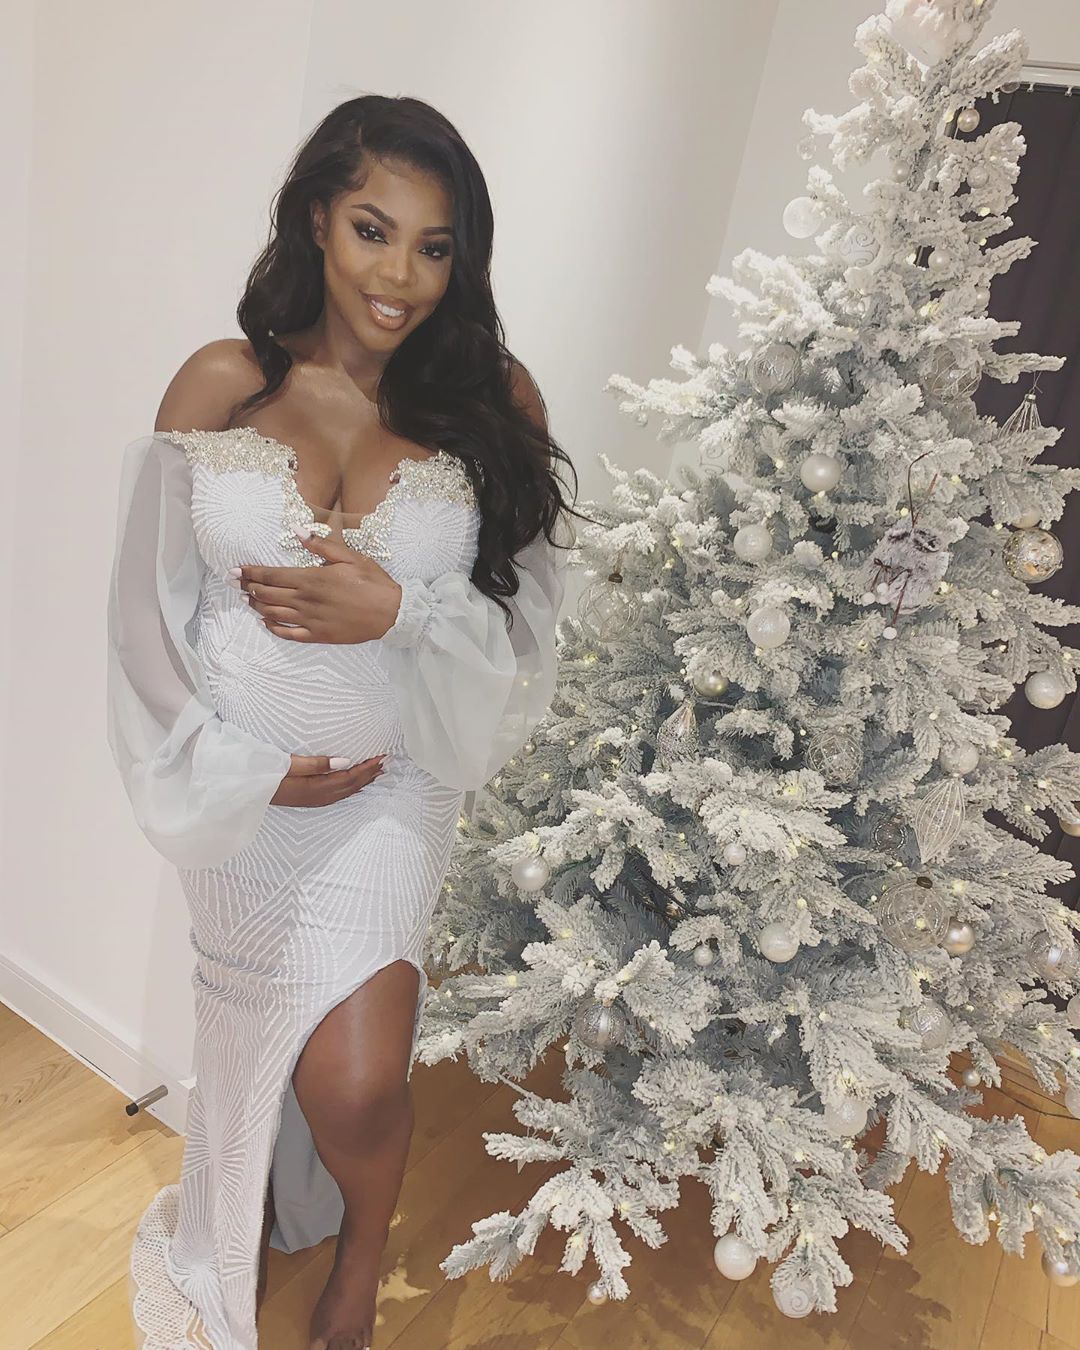 Vlogger Grace Ajilore is expecting a baby!